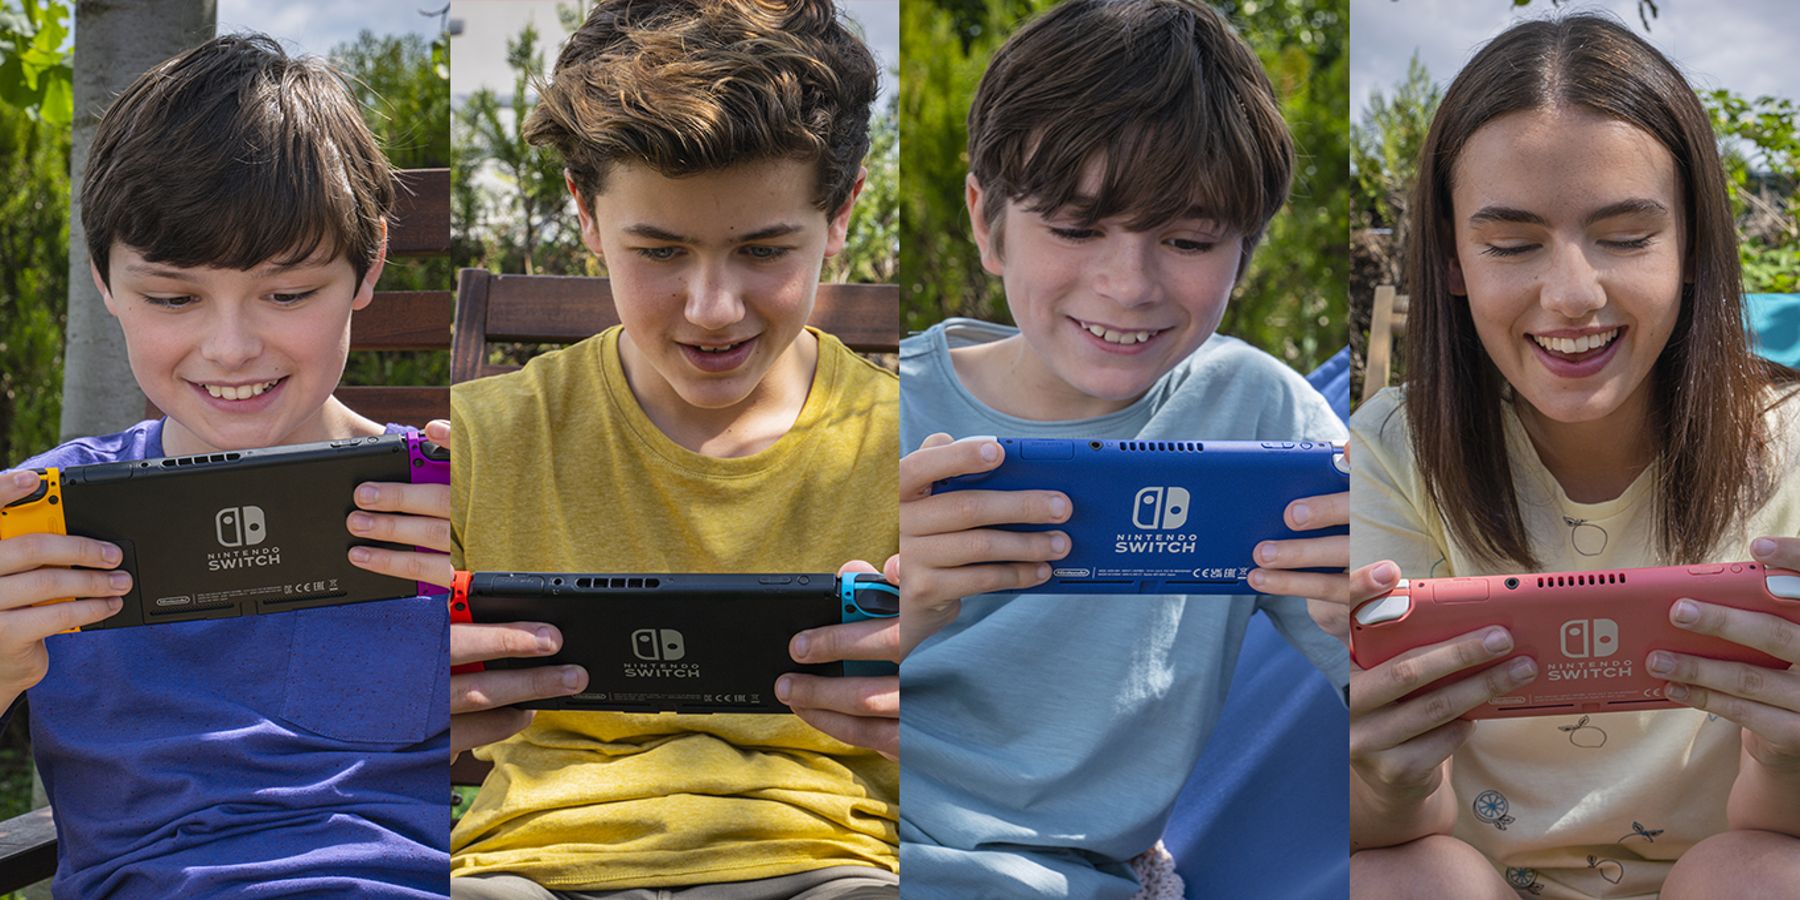 Nintendo Switch and Switch Lite with young players